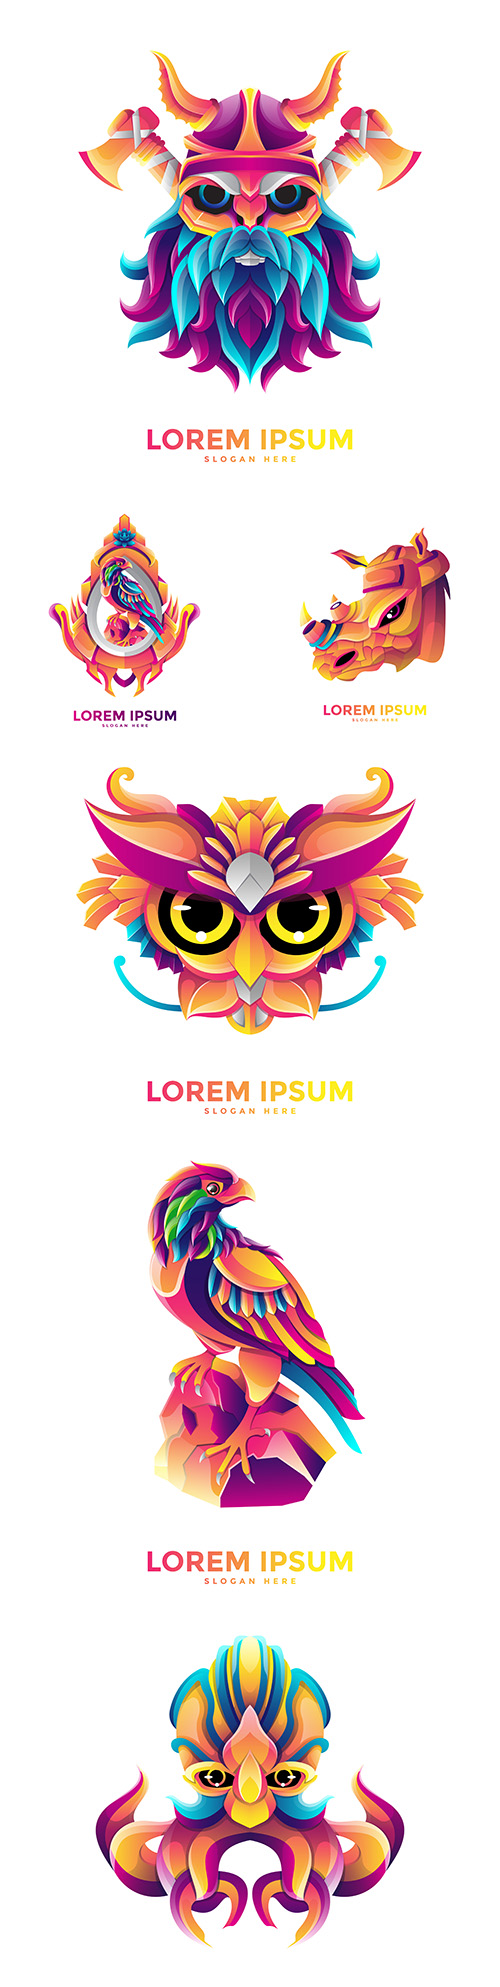 Origami logo colorful design in modern style
